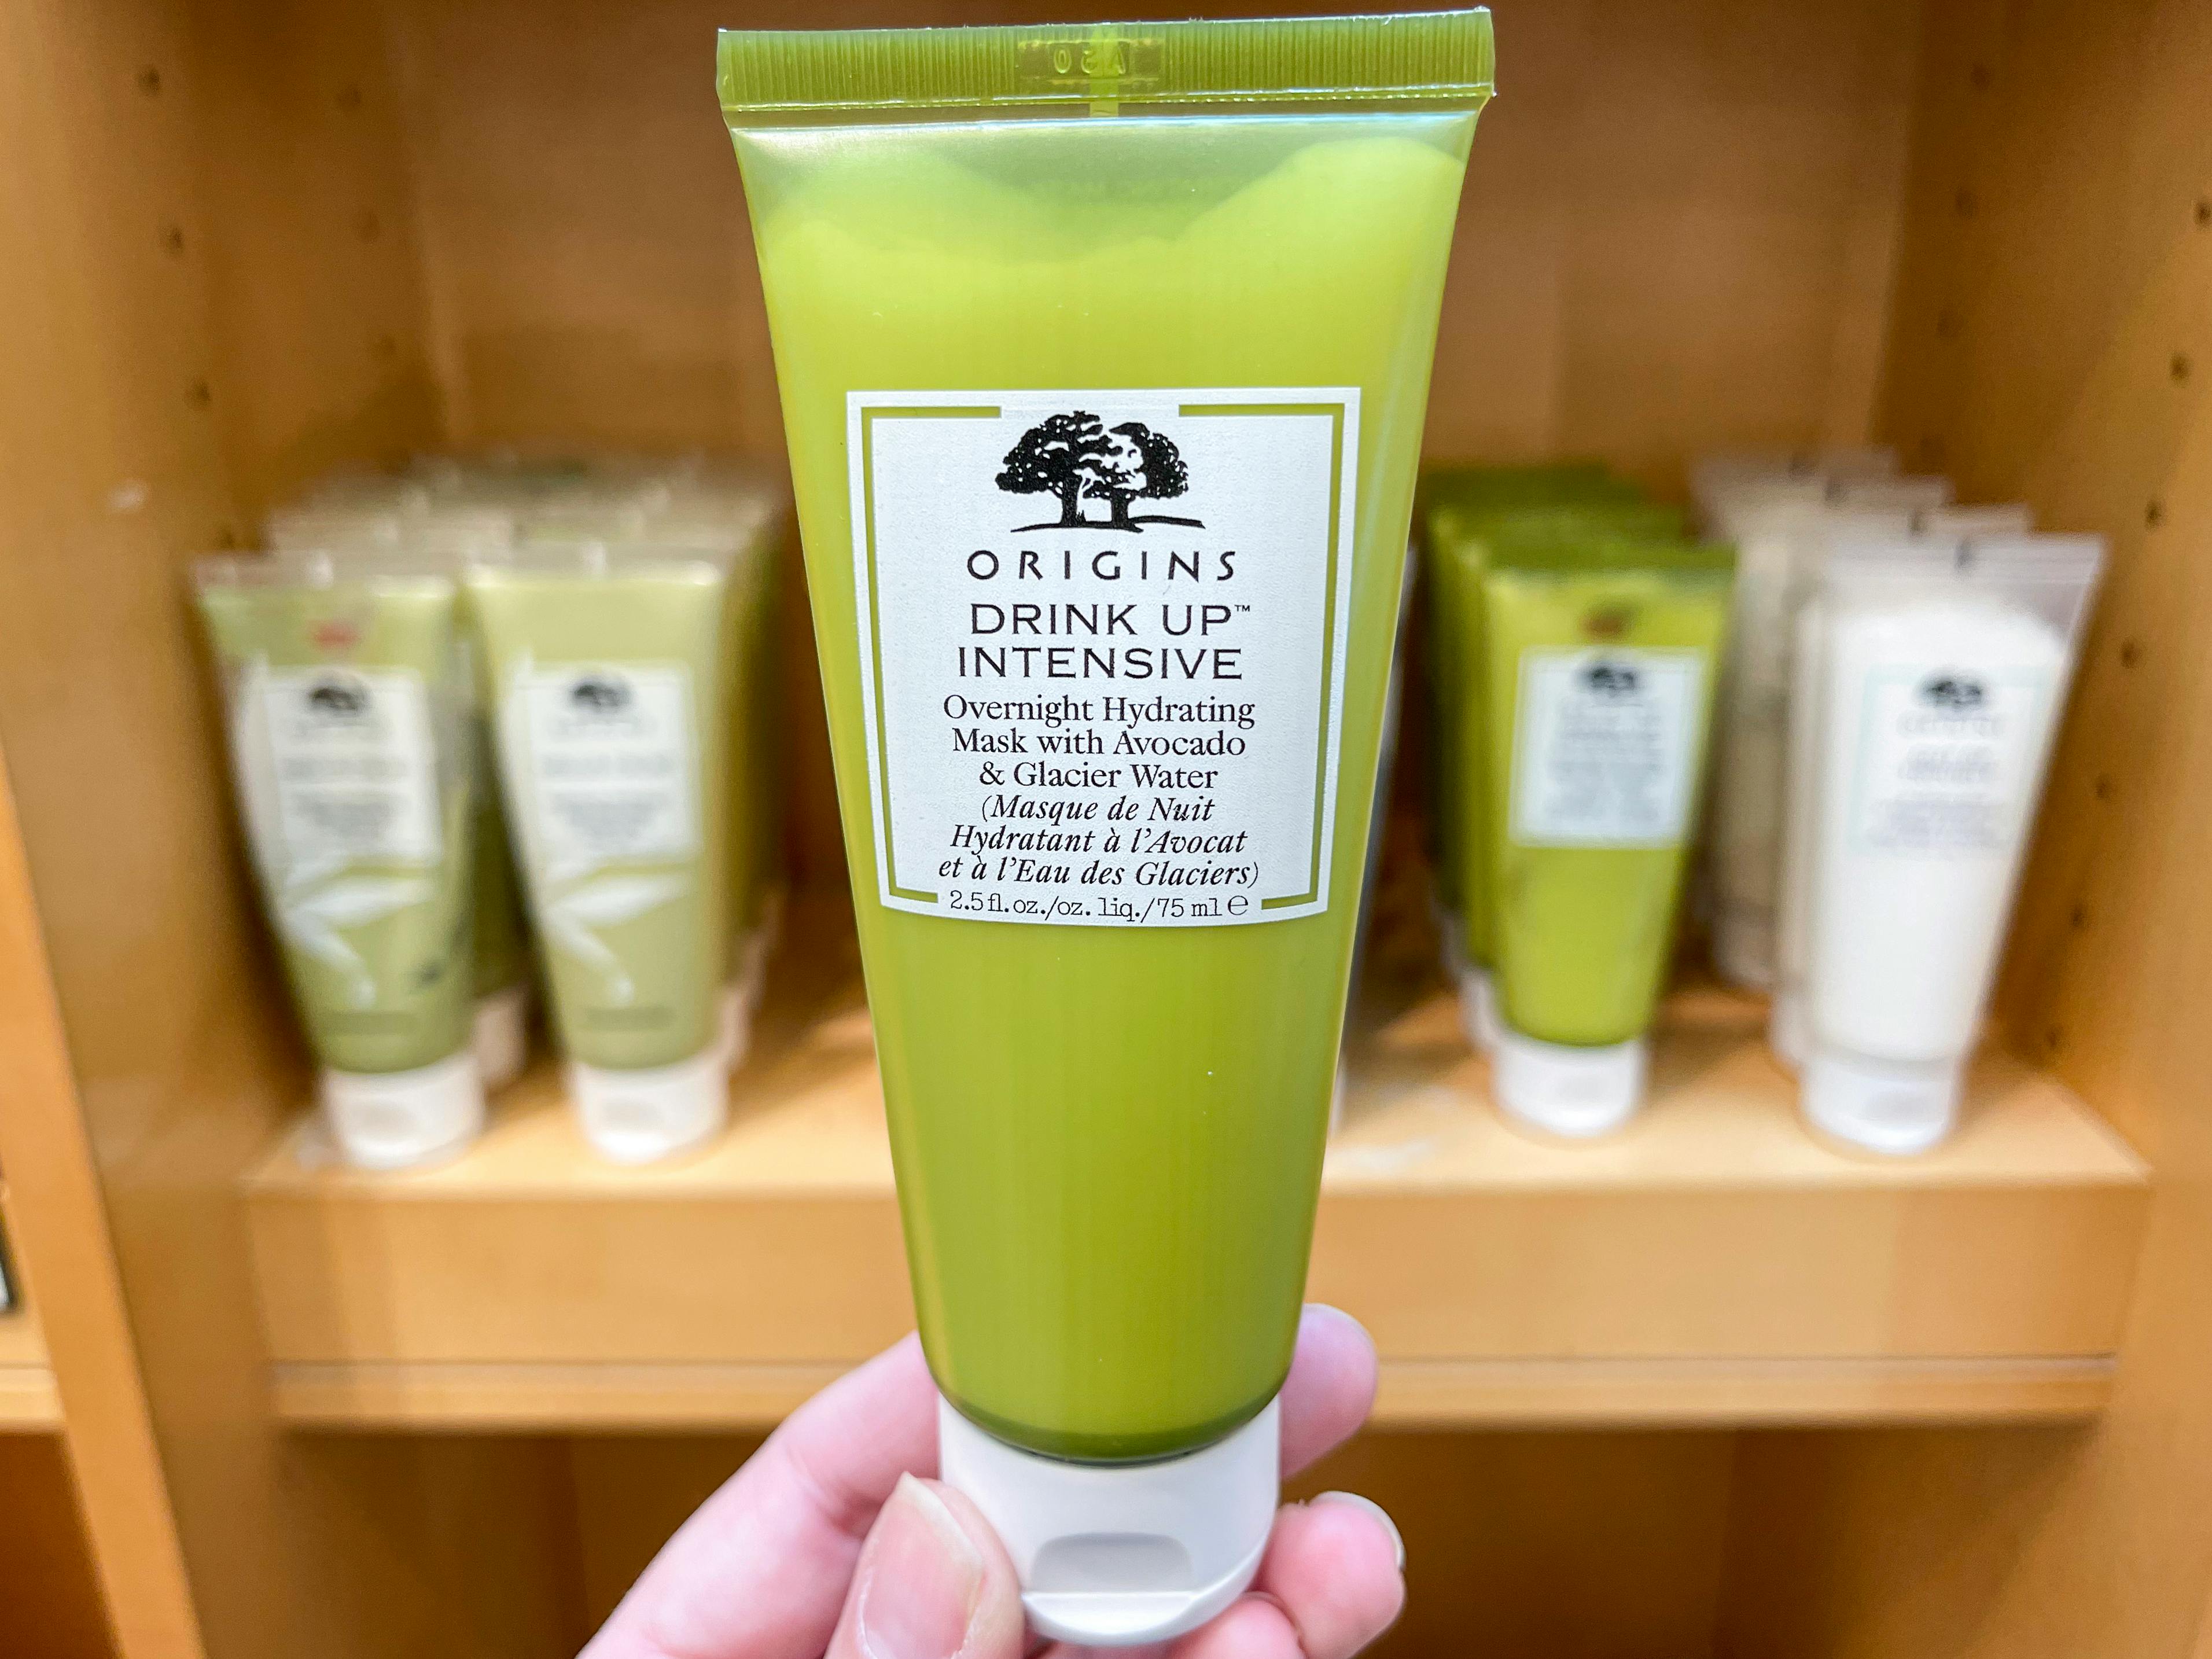 Origins overnight face mask at Macy's.